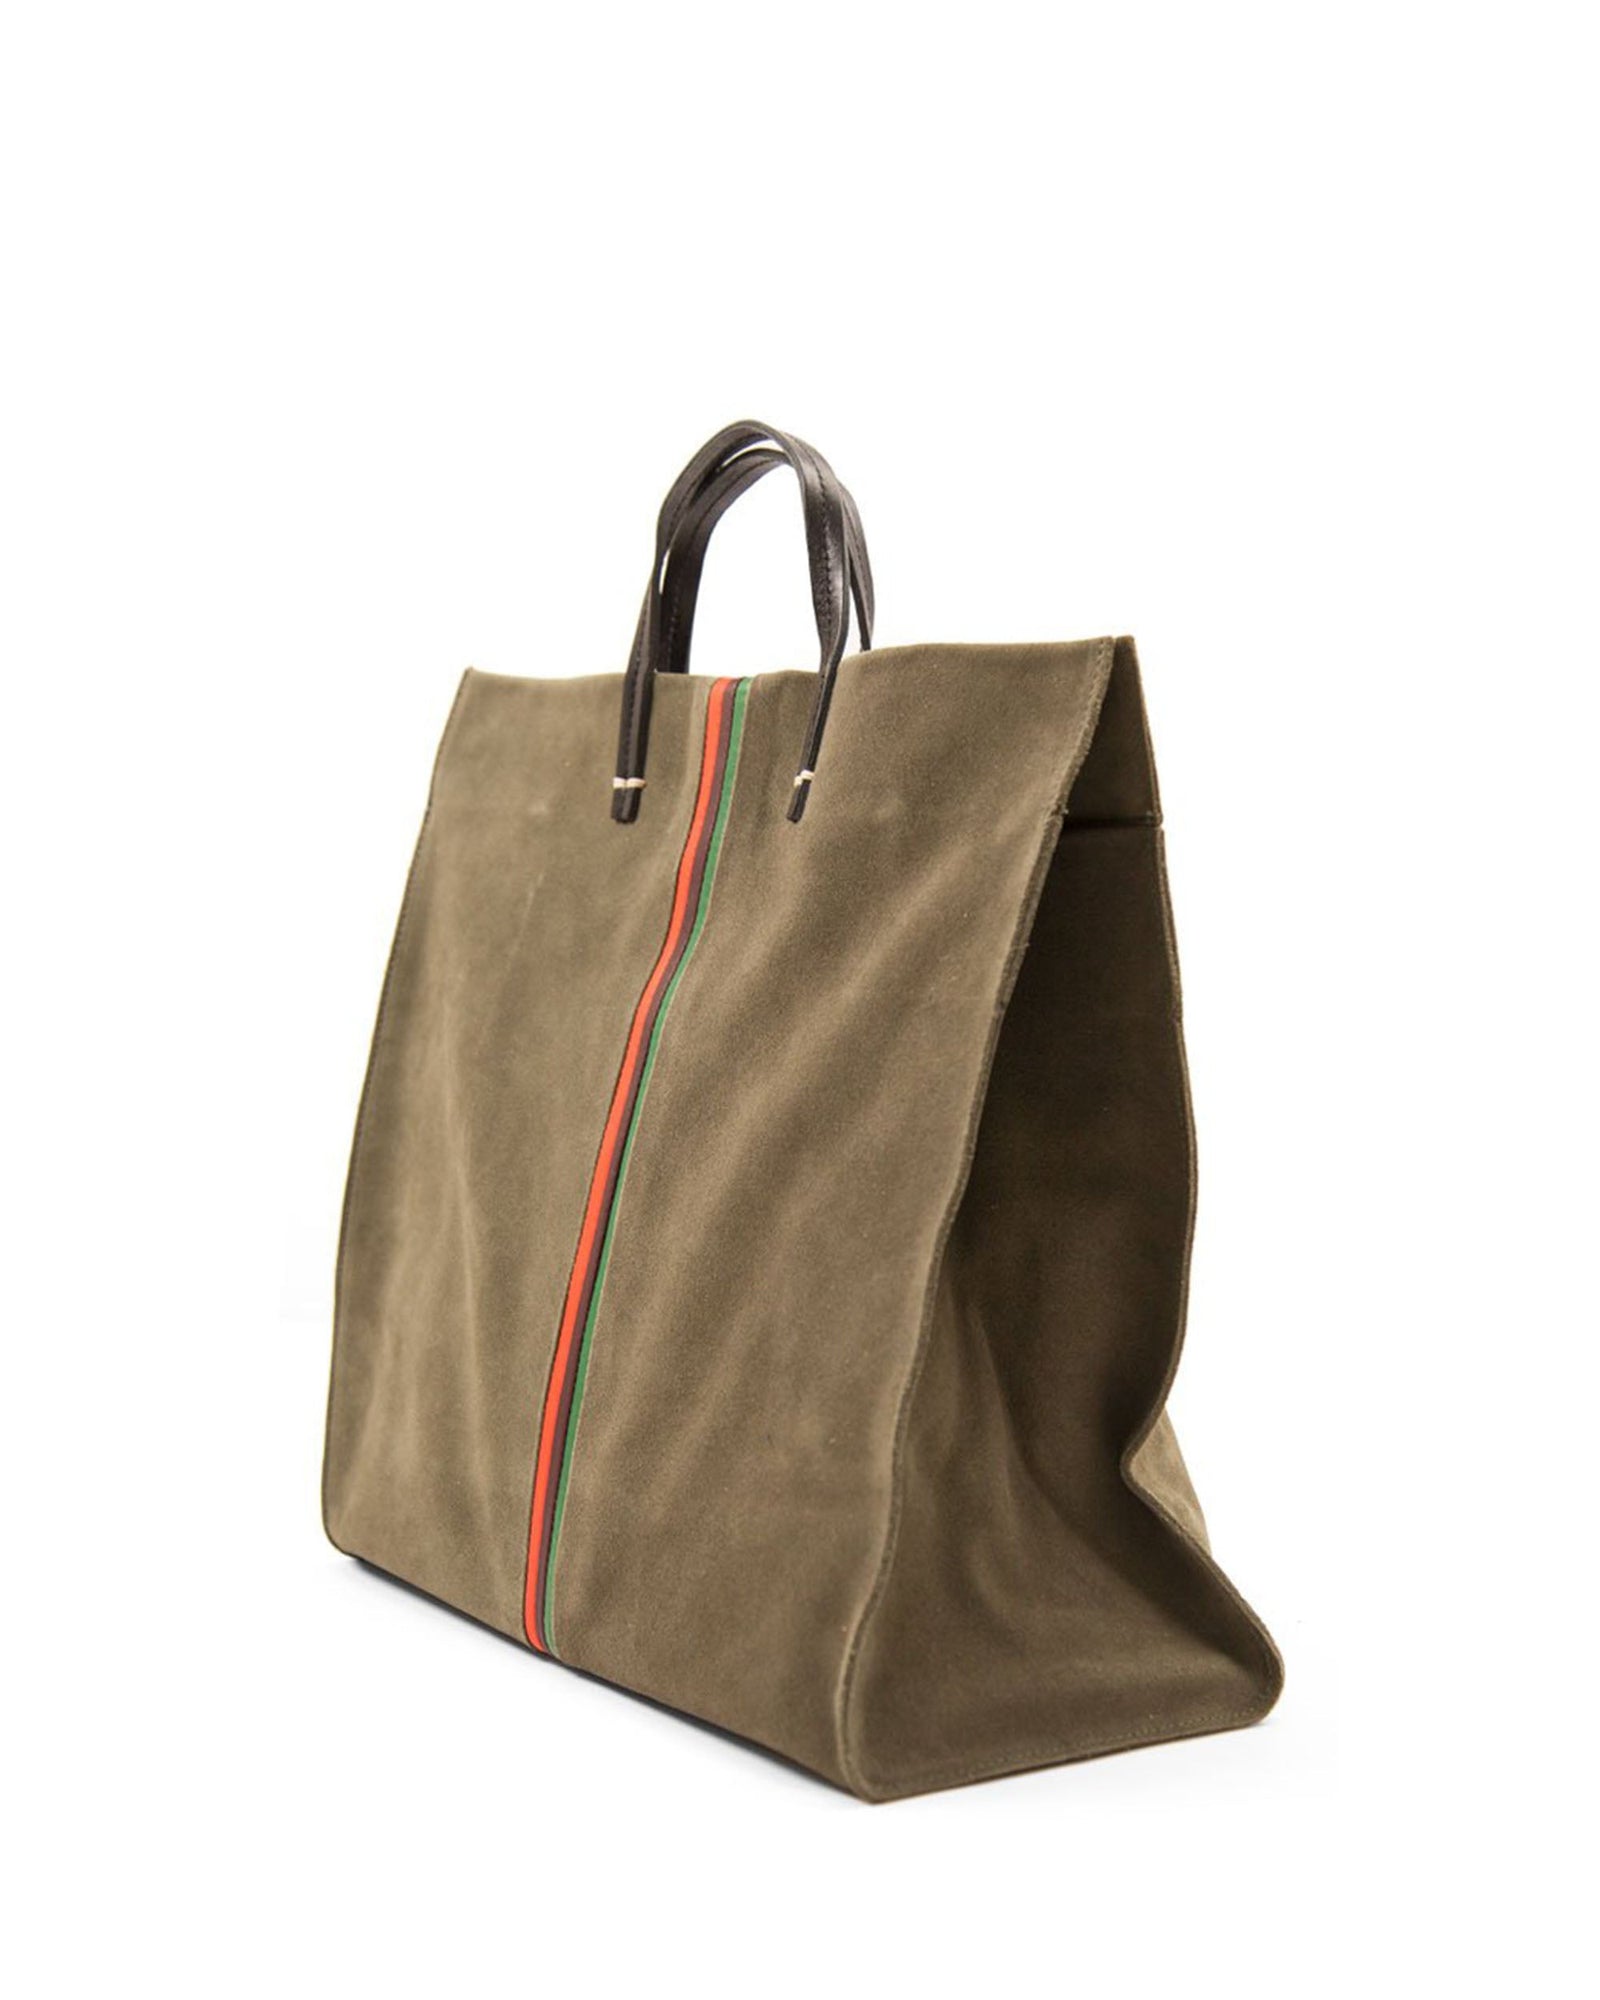 Army Suede with Lipsitck, Plum, and Fern Mini Stripes Simple Tote - Back